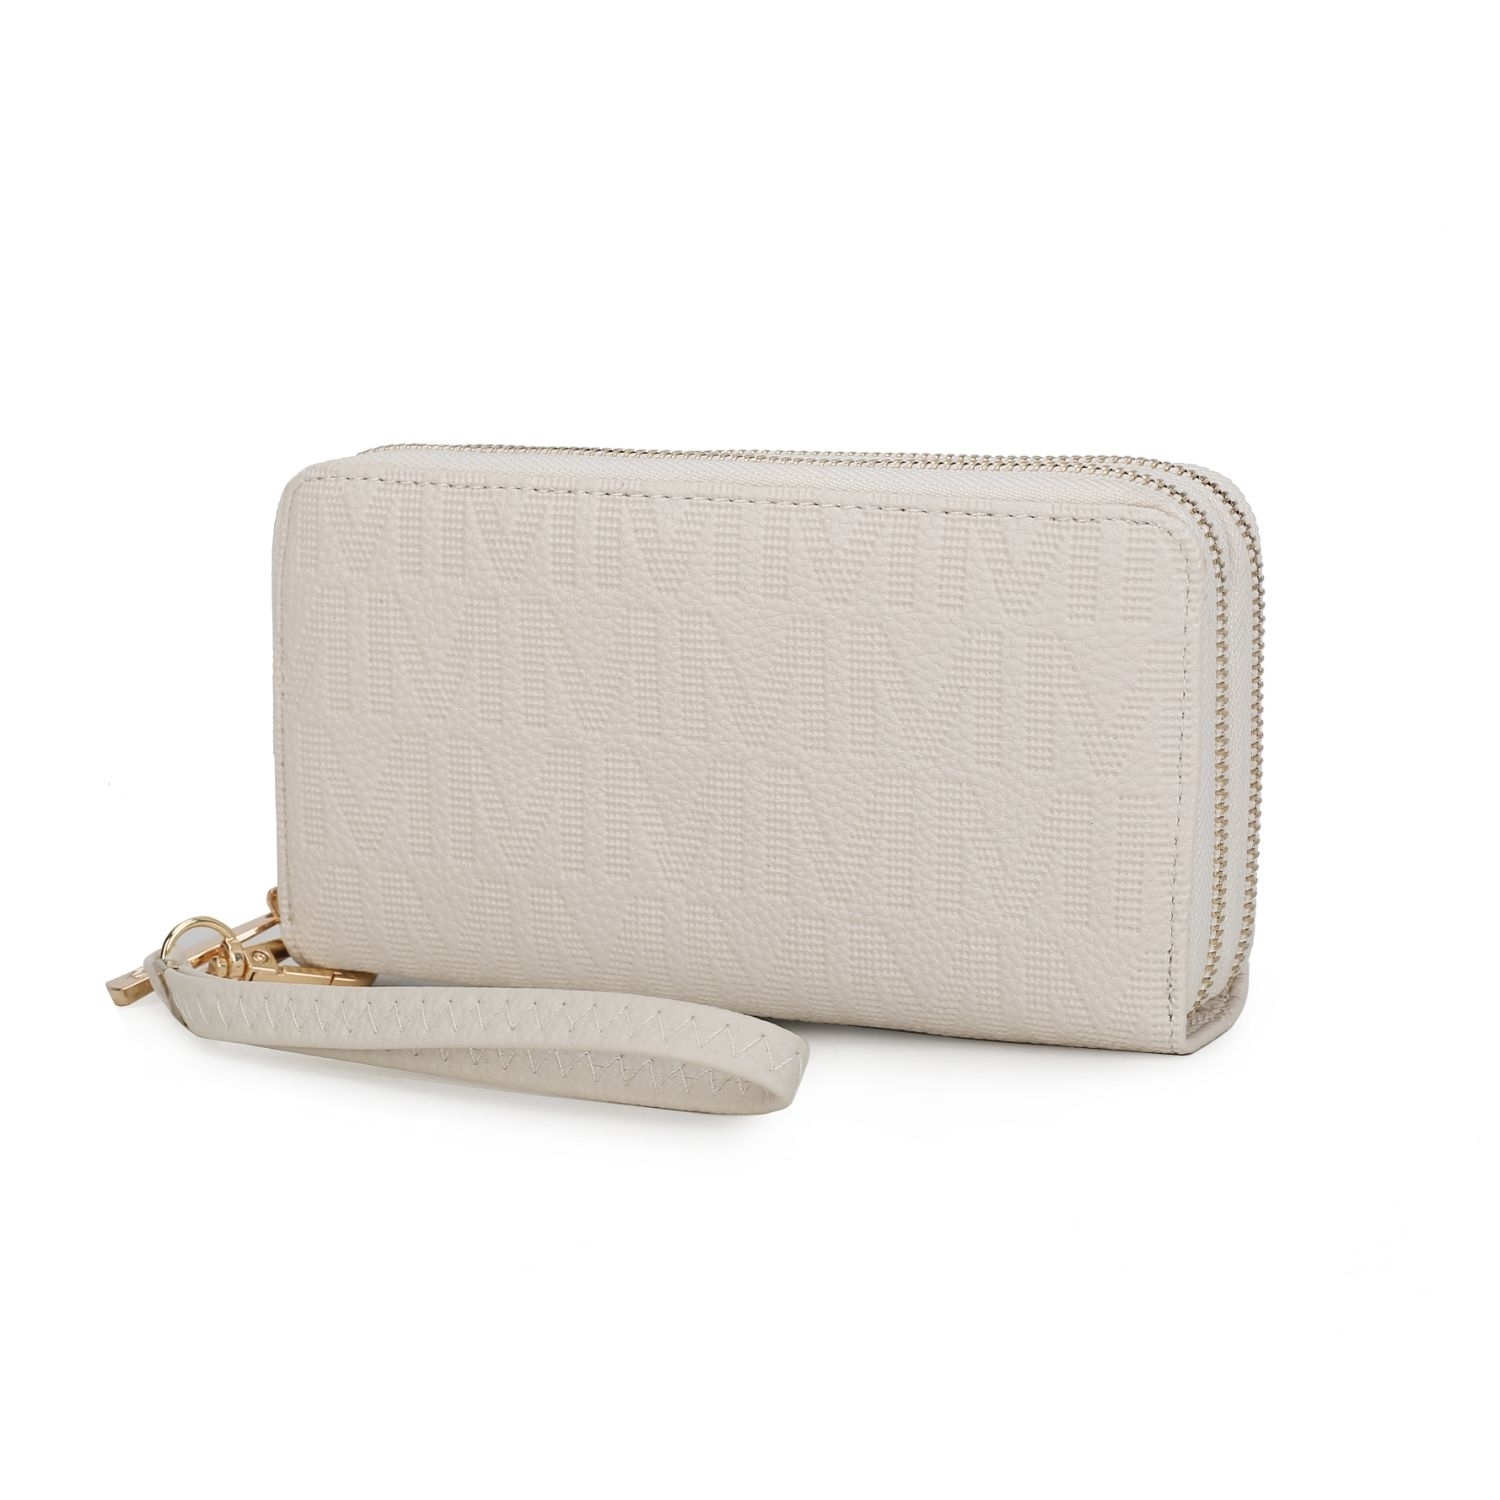 MKF Collection Lisbette Embossed M Signature Wallet By Mia K. Handbag - Pewter